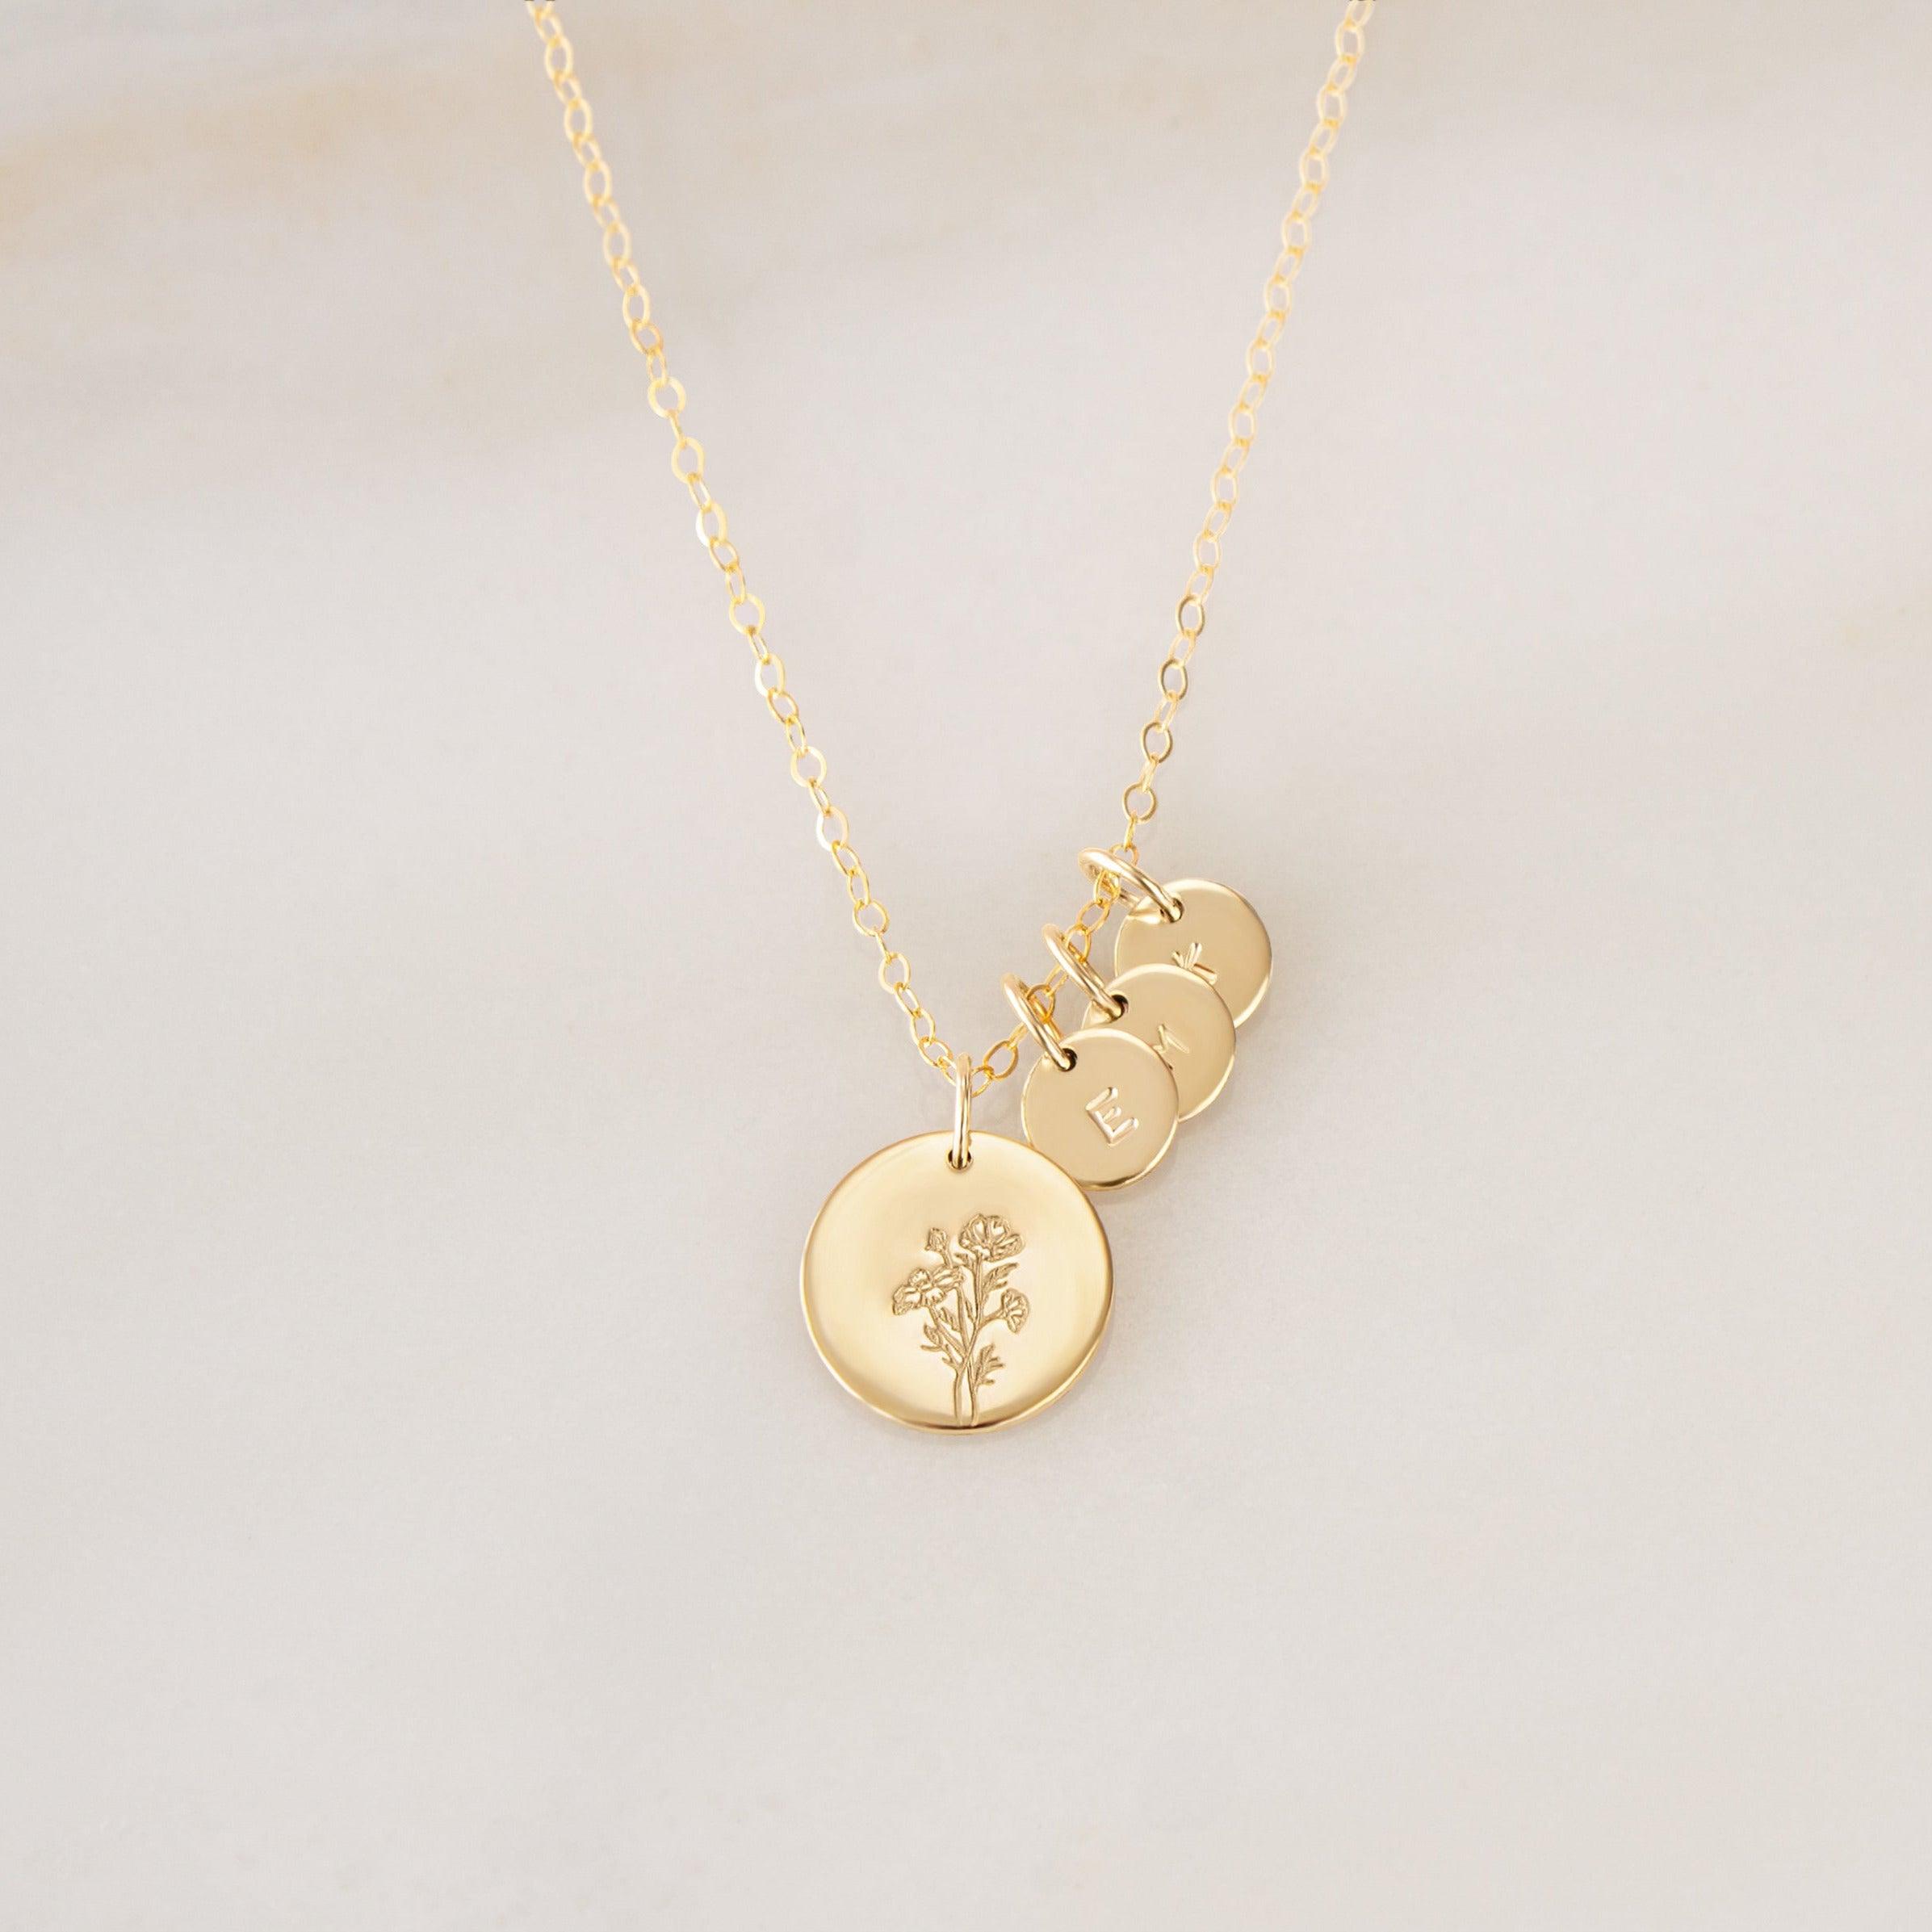 Olivia Personalized Charm Necklace - Nolia Jewelry - Meaningful + Sustainably Handcrafted Jewelry